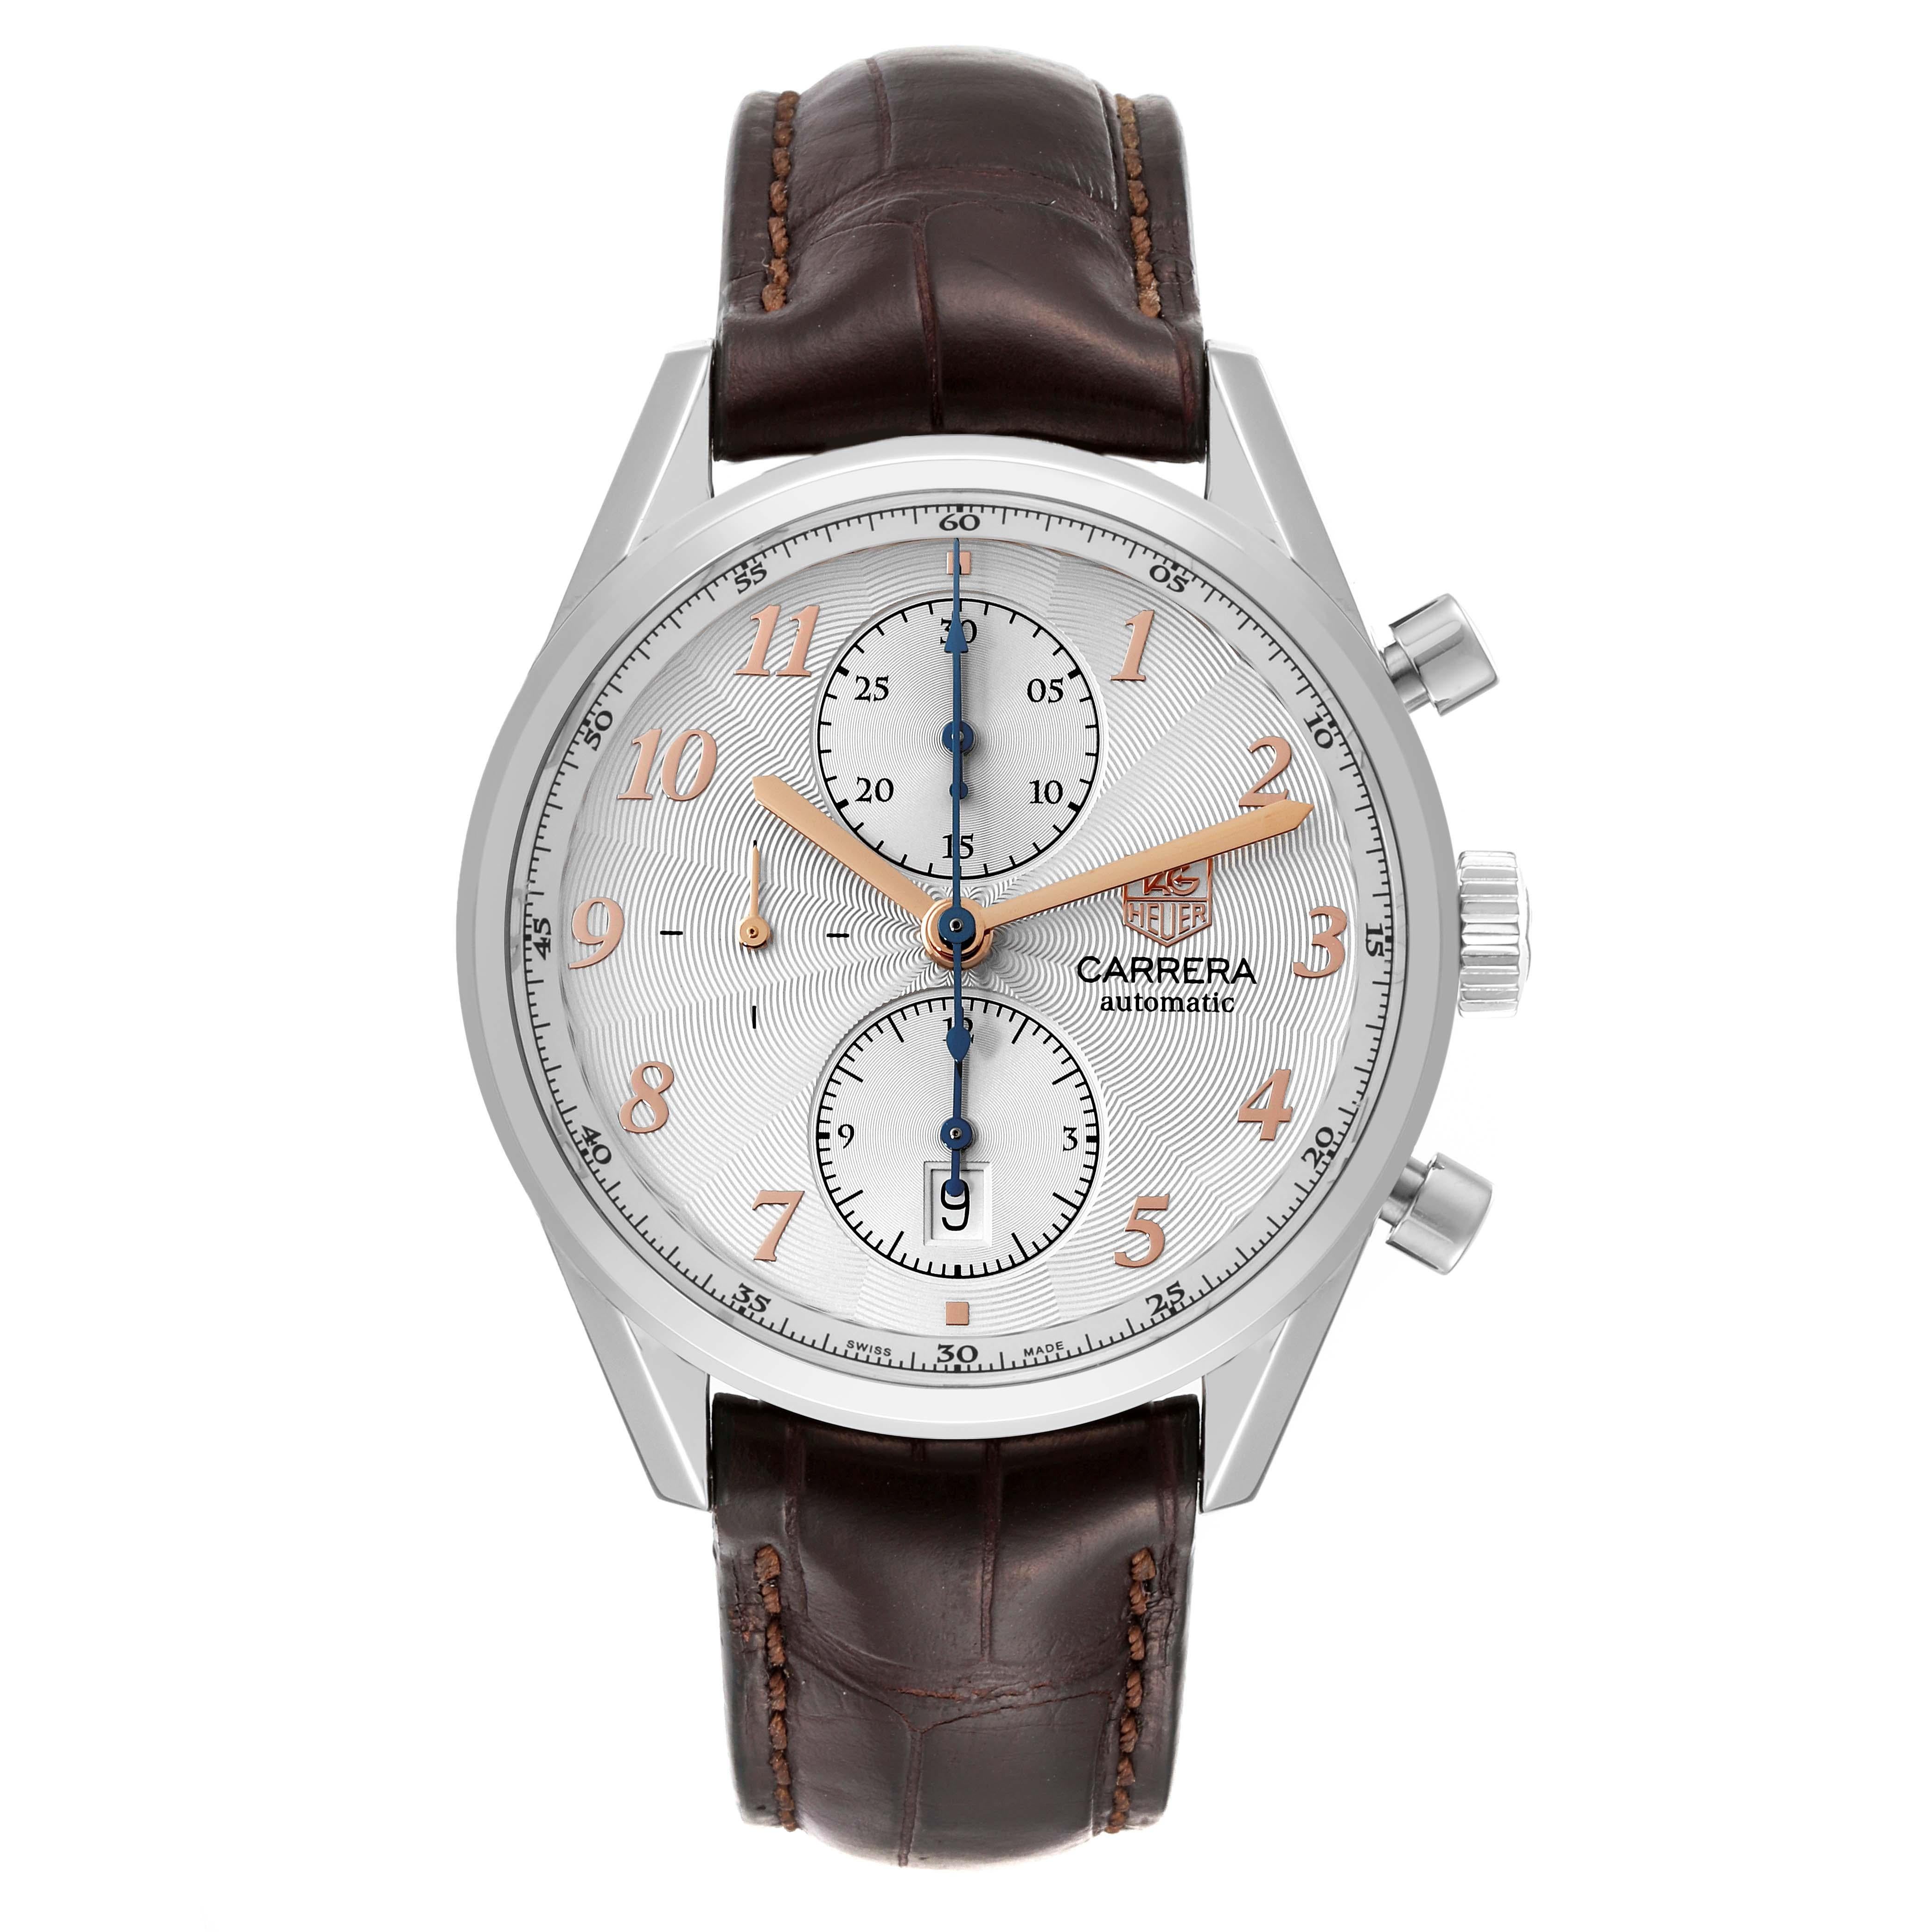 Tag Heuer Carrera Heritage Calibre 16 Steel Mens Watch CAS2112. Automatic self-winding chronograph movement. Stainless steel case 41.0 mm. Transparent exhibition sapphire crystal caseback. Stainless steel smooth bezel. Scratch resistant sapphire